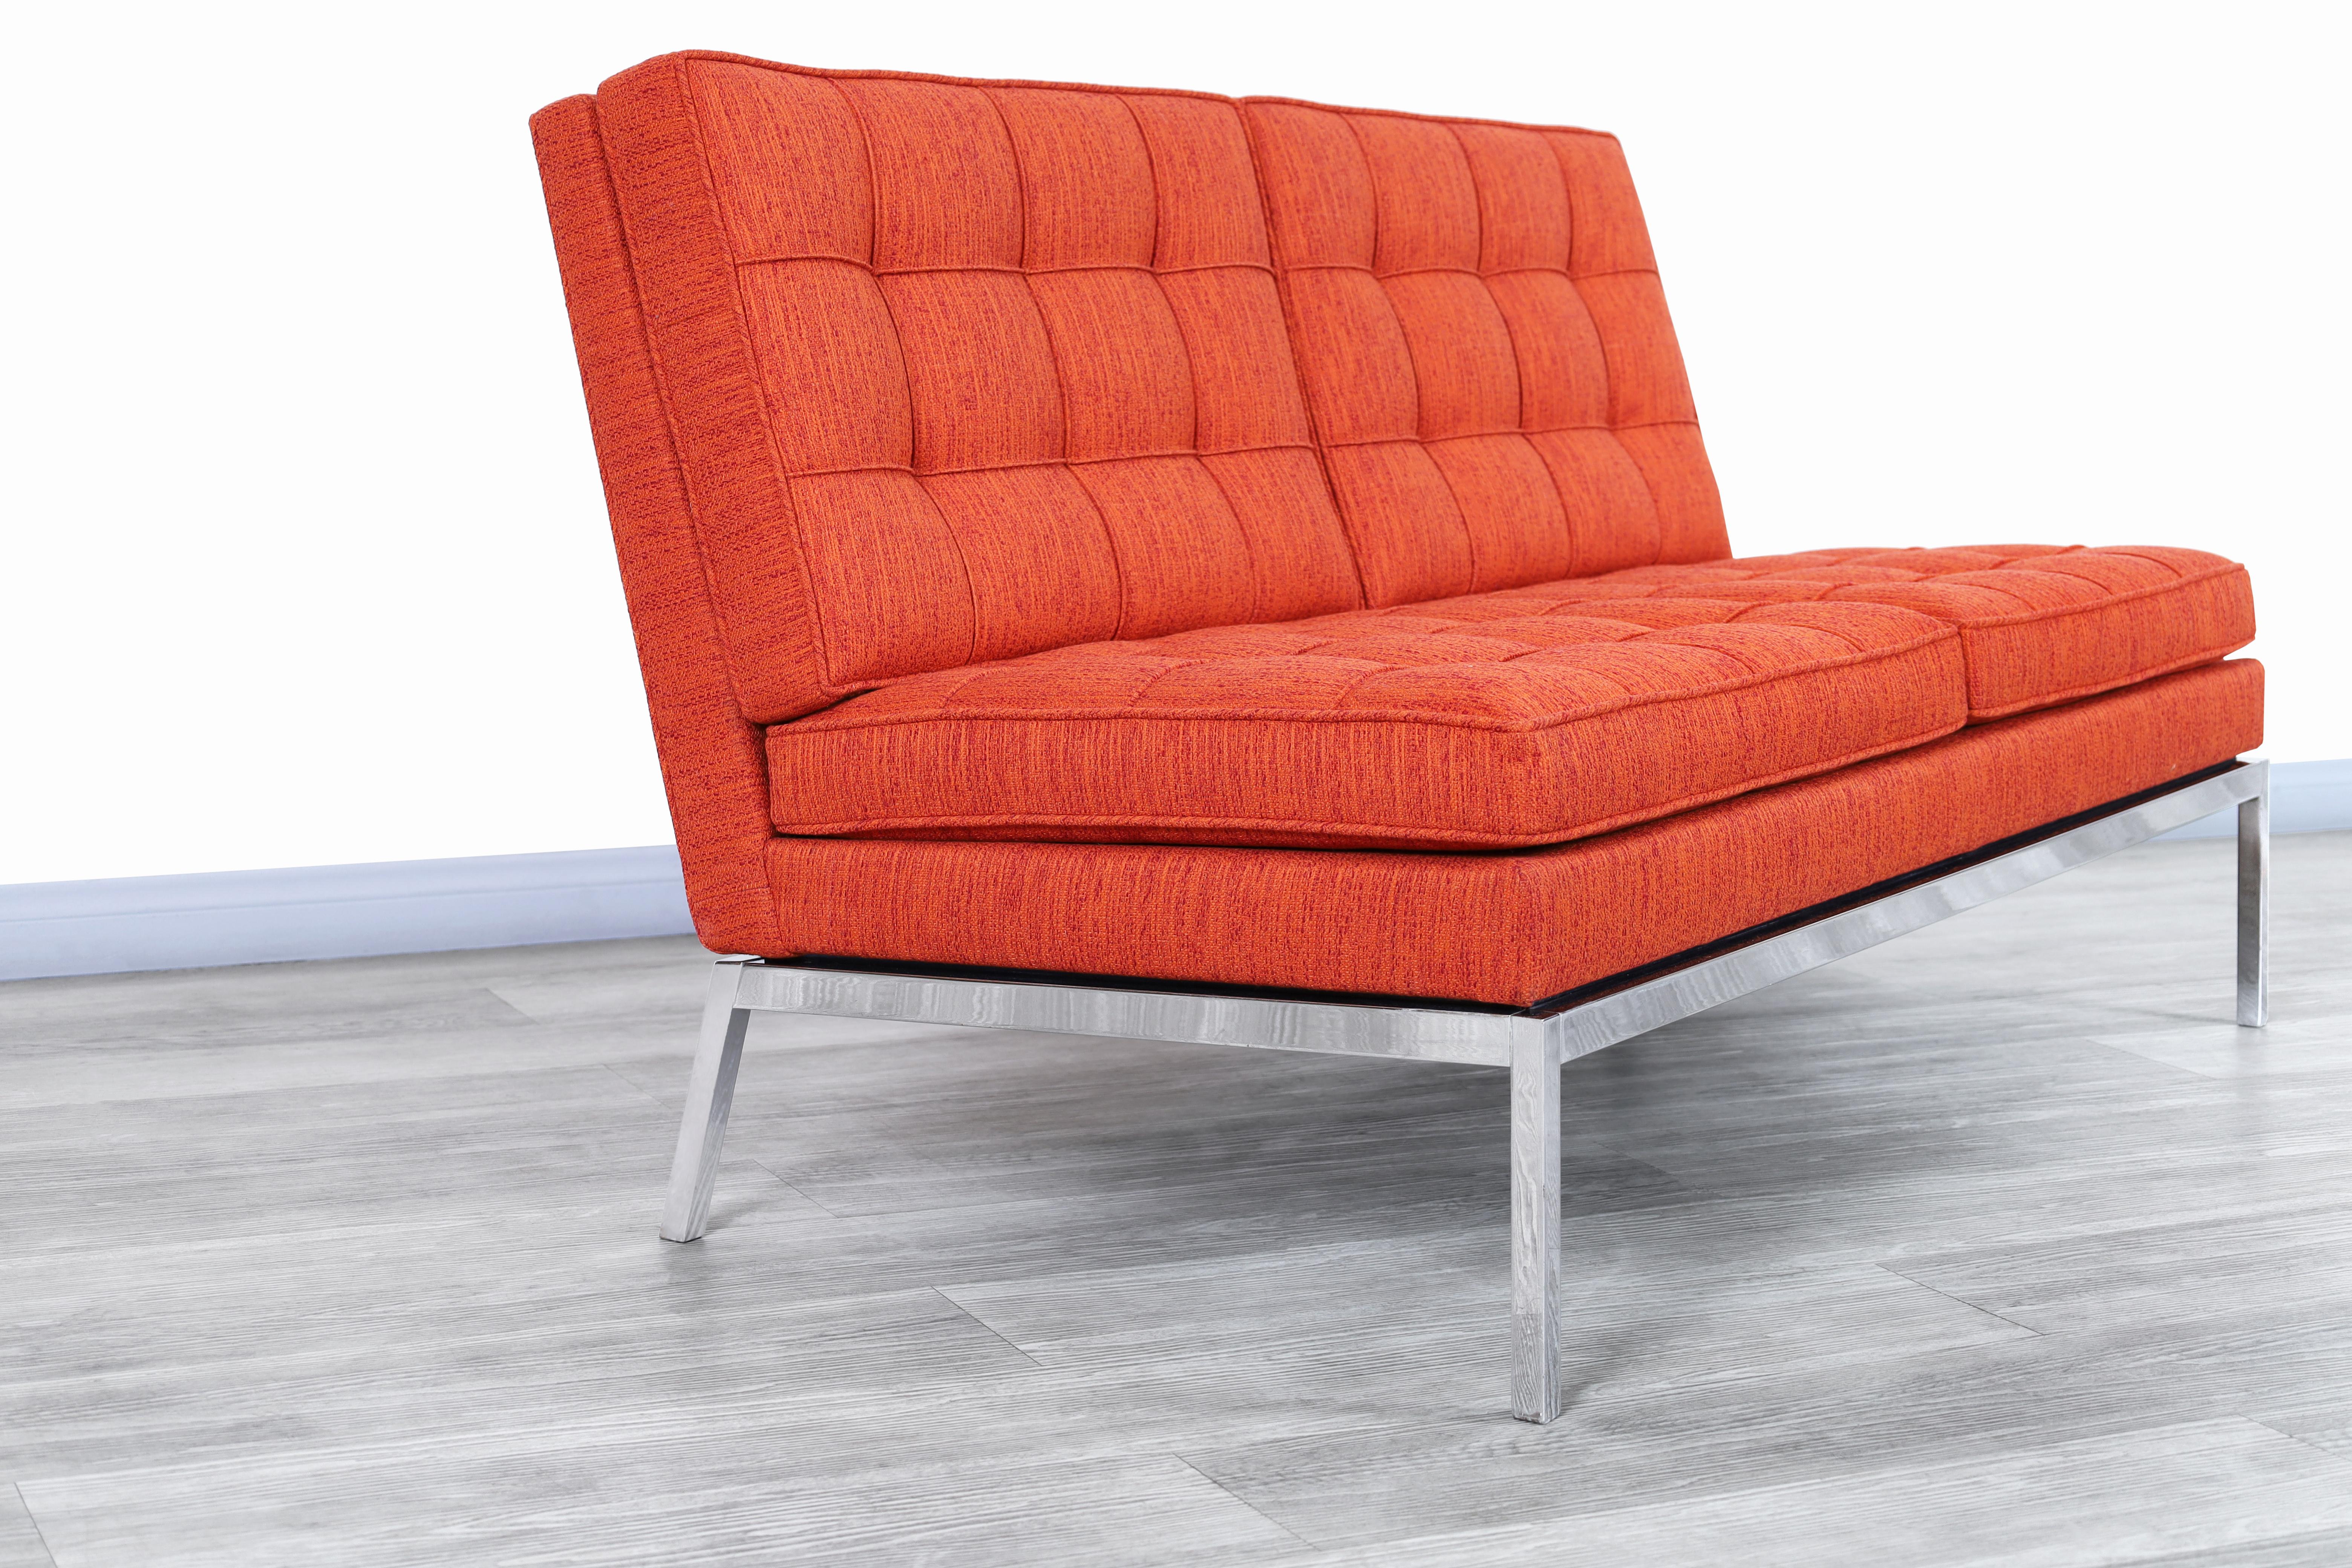 Steel Mid-Century Modern Settee by Florence Knoll For Sale